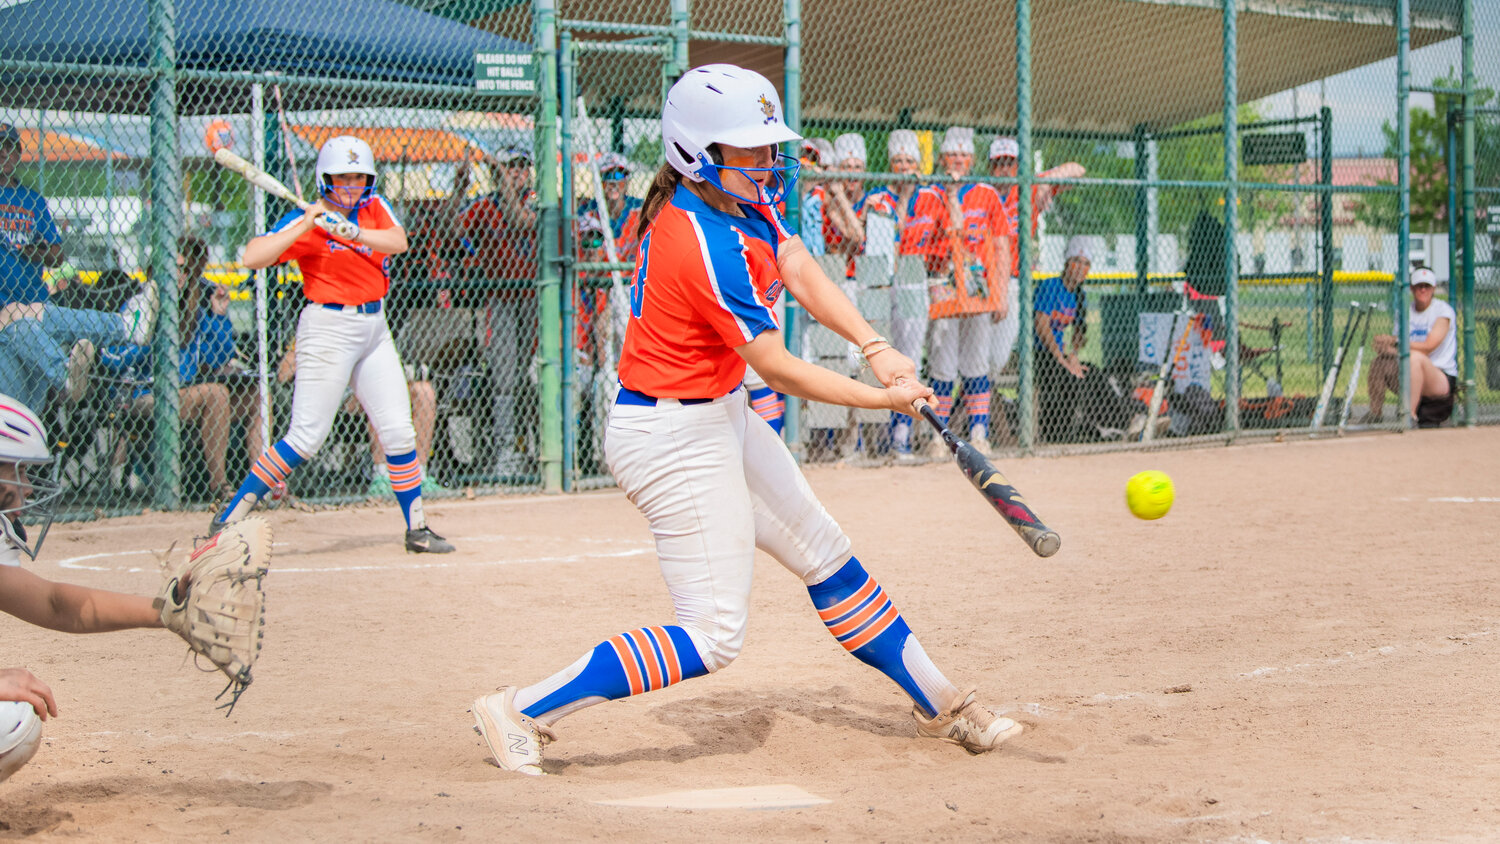 Ridgefield’s Makayla Ferguson (13) puts her bat on the ball during a state title game against North Kitsap at Carlon Park in Selah on Saturday, May 27.